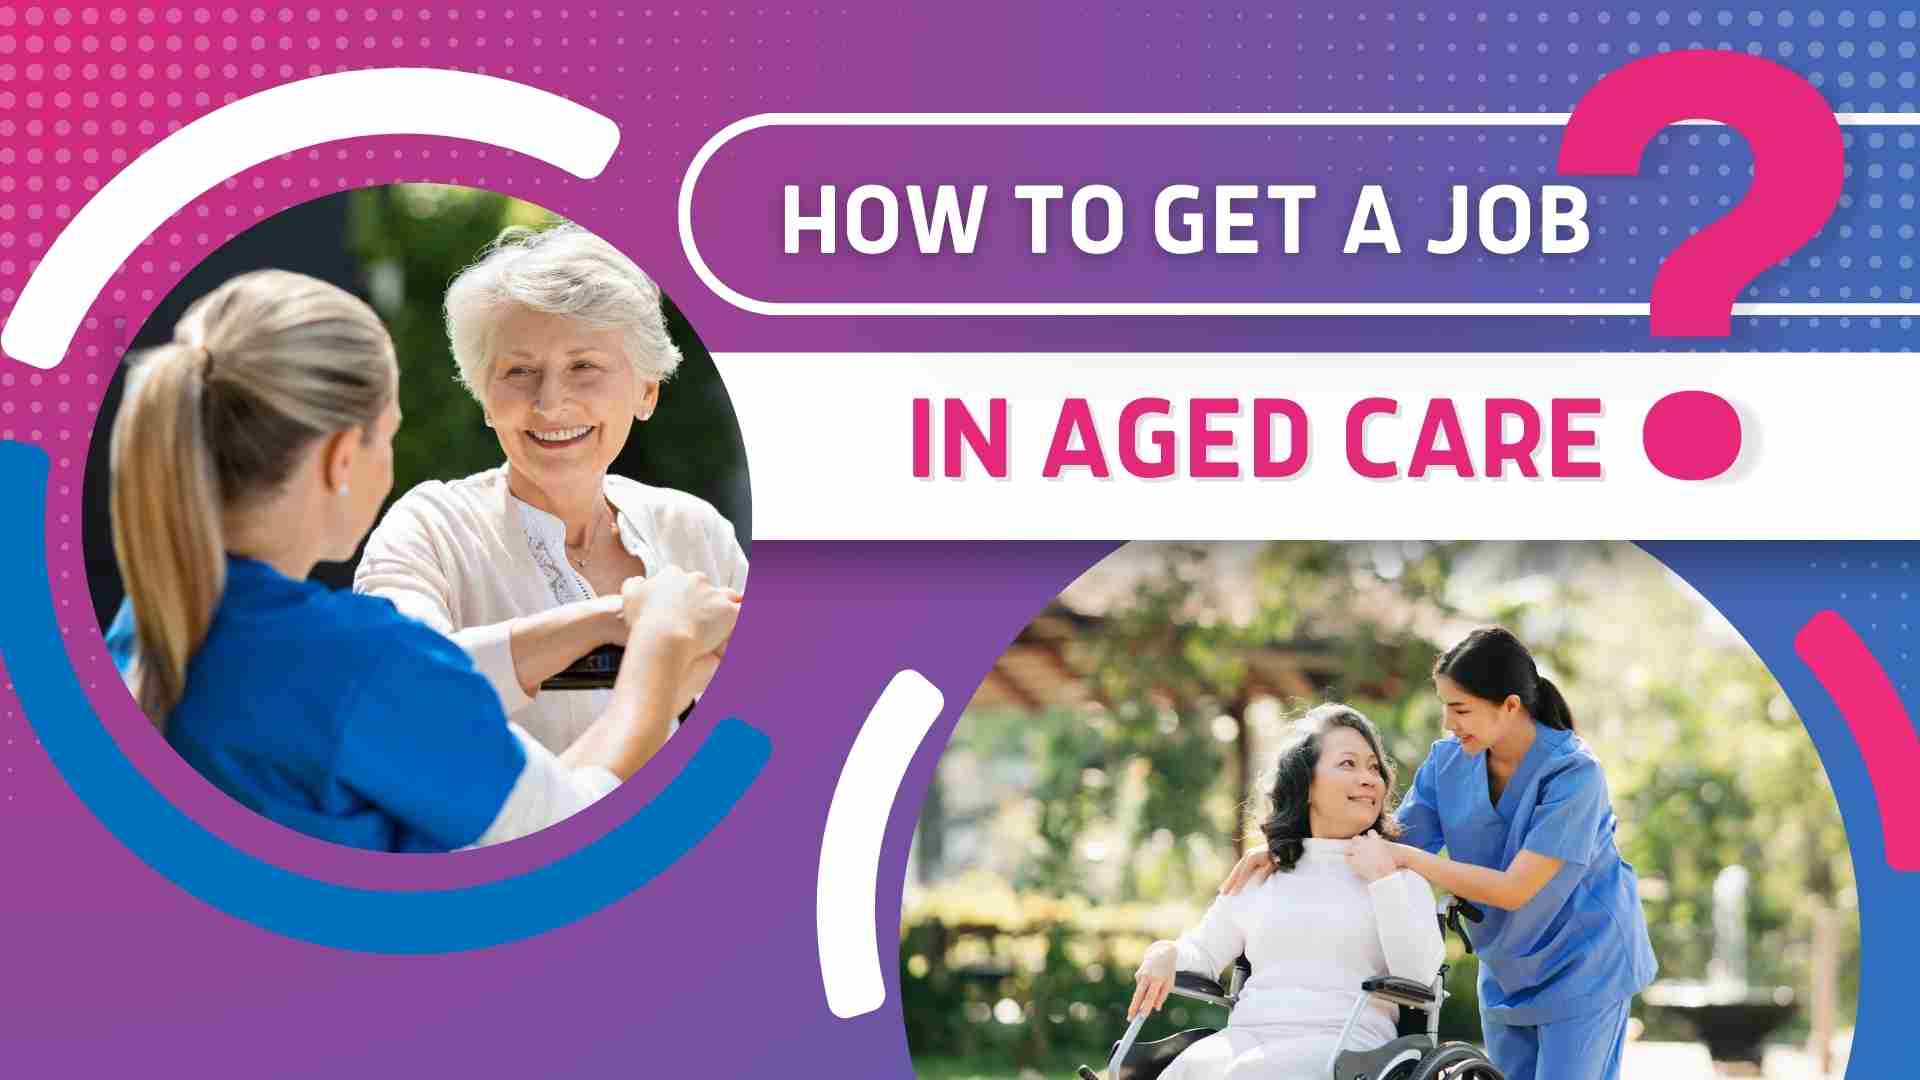 How to get a job in Aged Care?